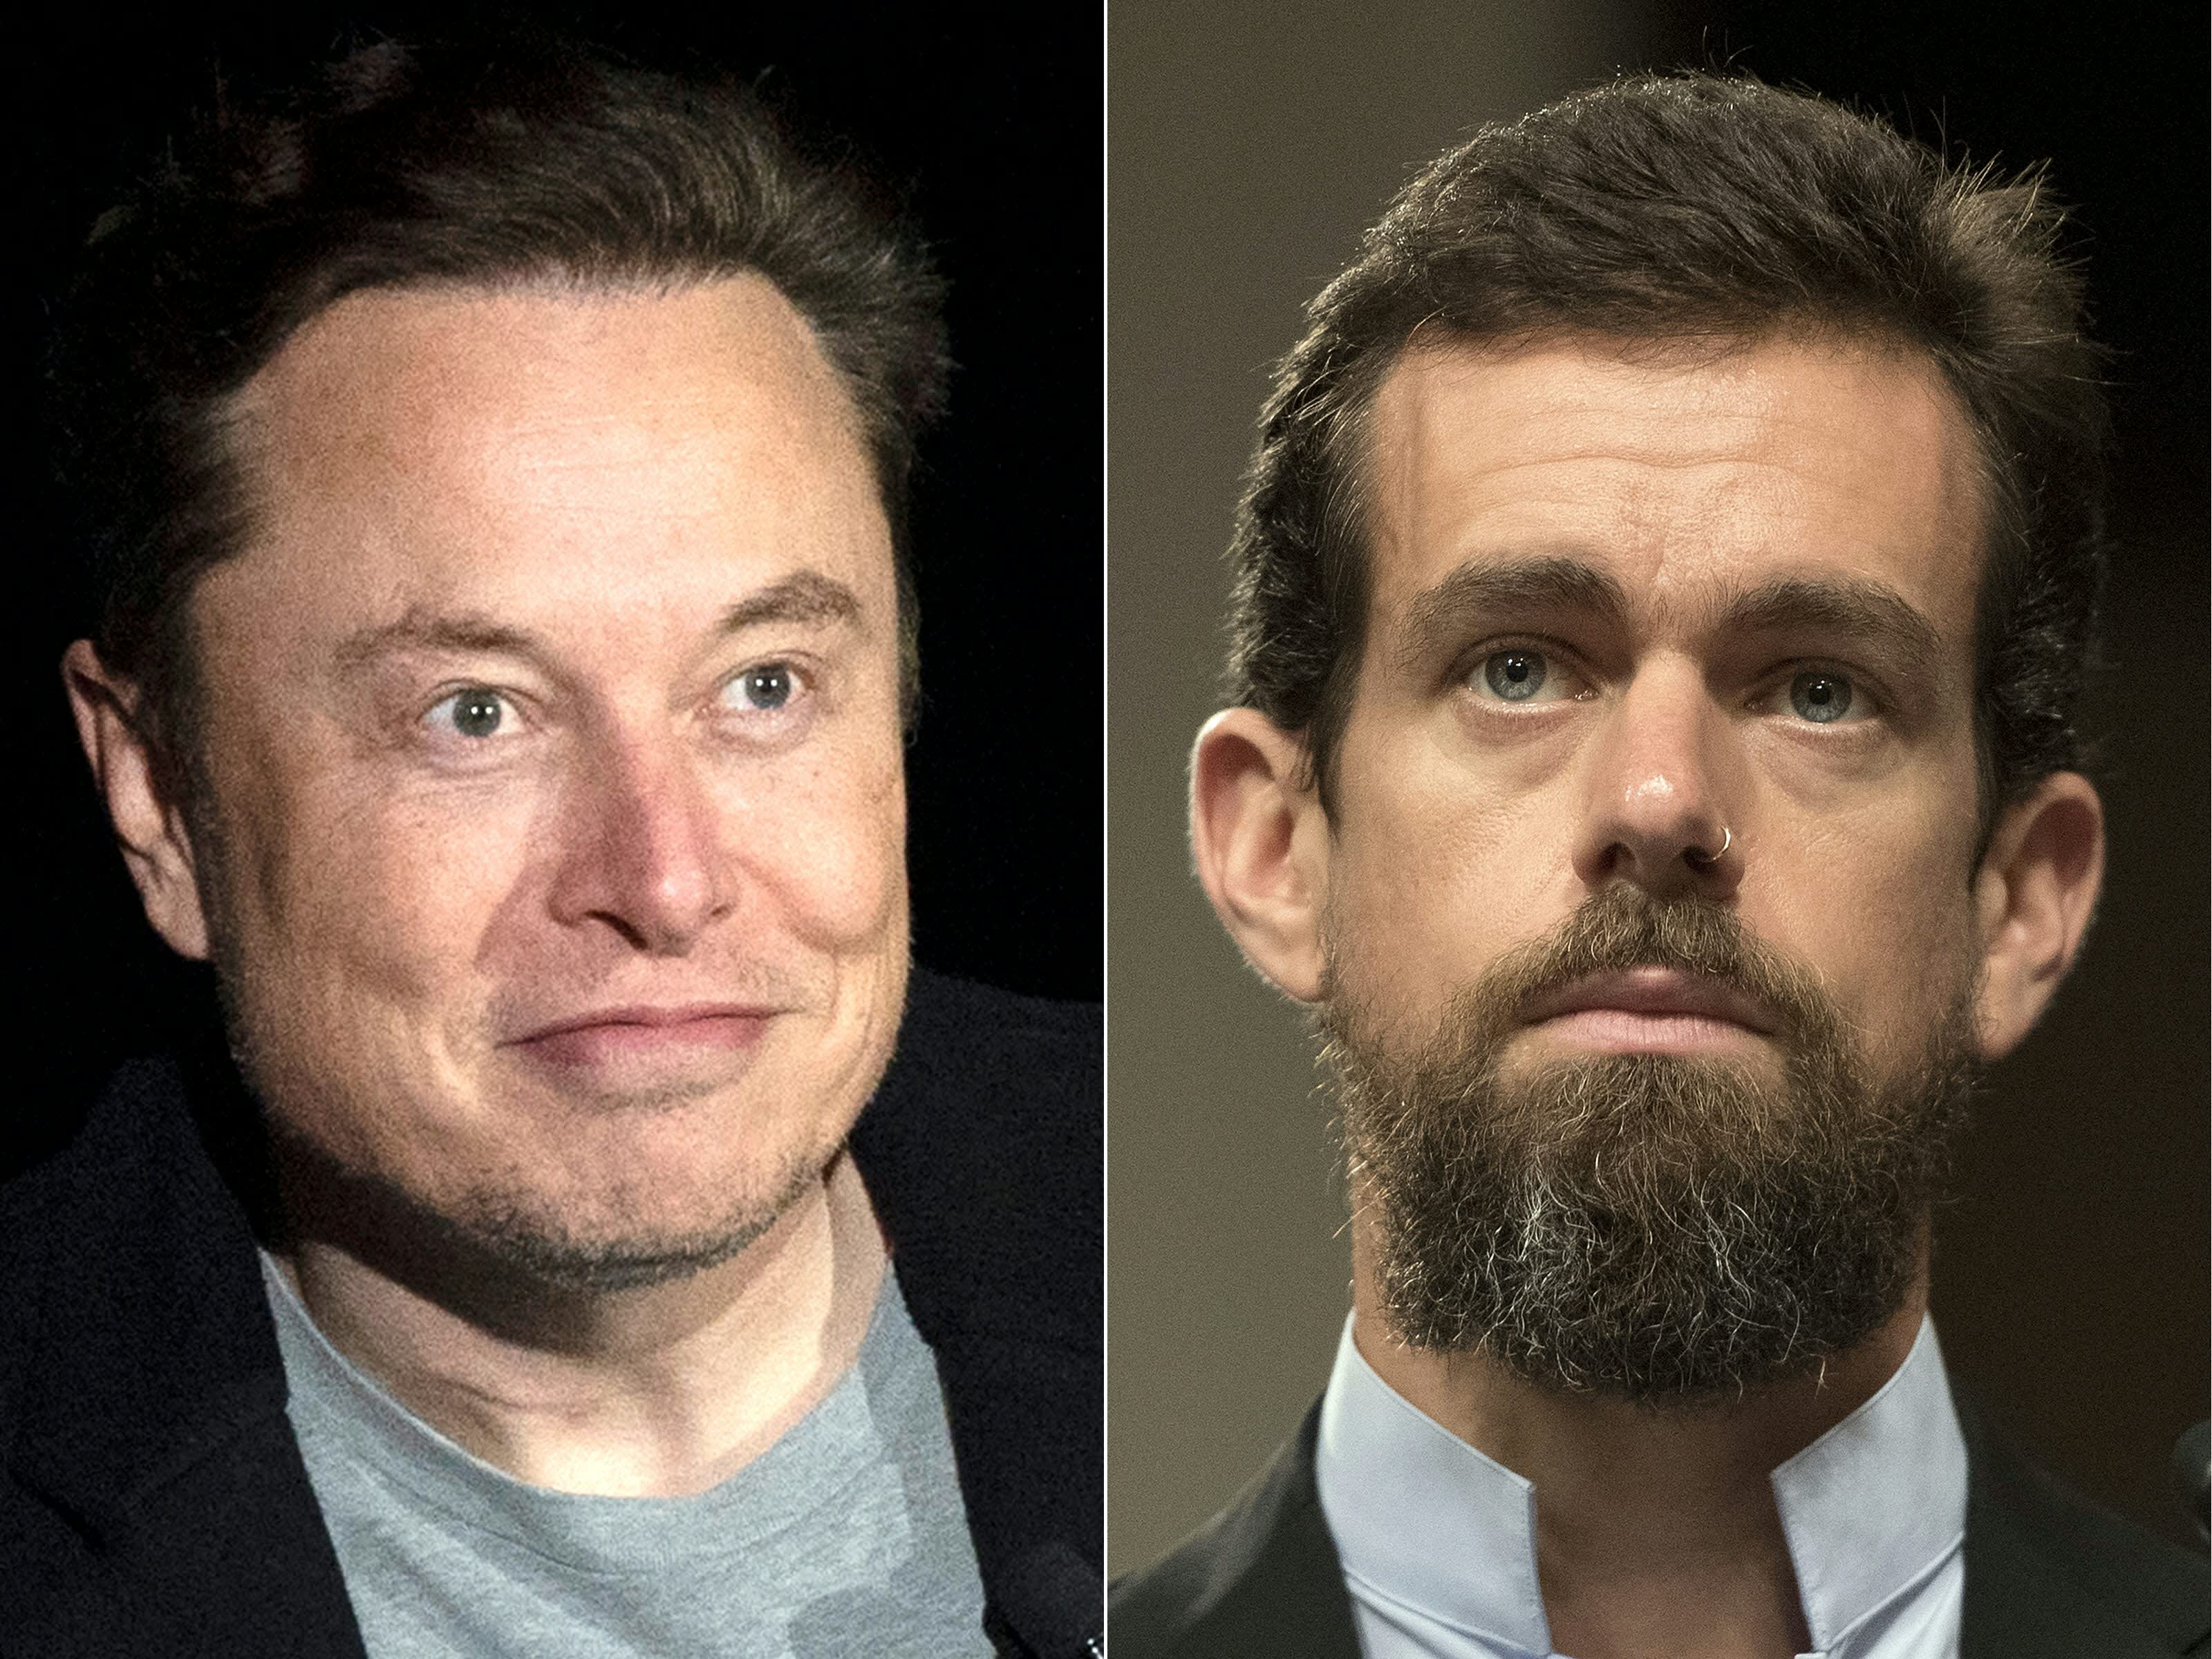 Jack Dorsey: Twitter went south after Elon Musk bought it, he's not the best person to run it